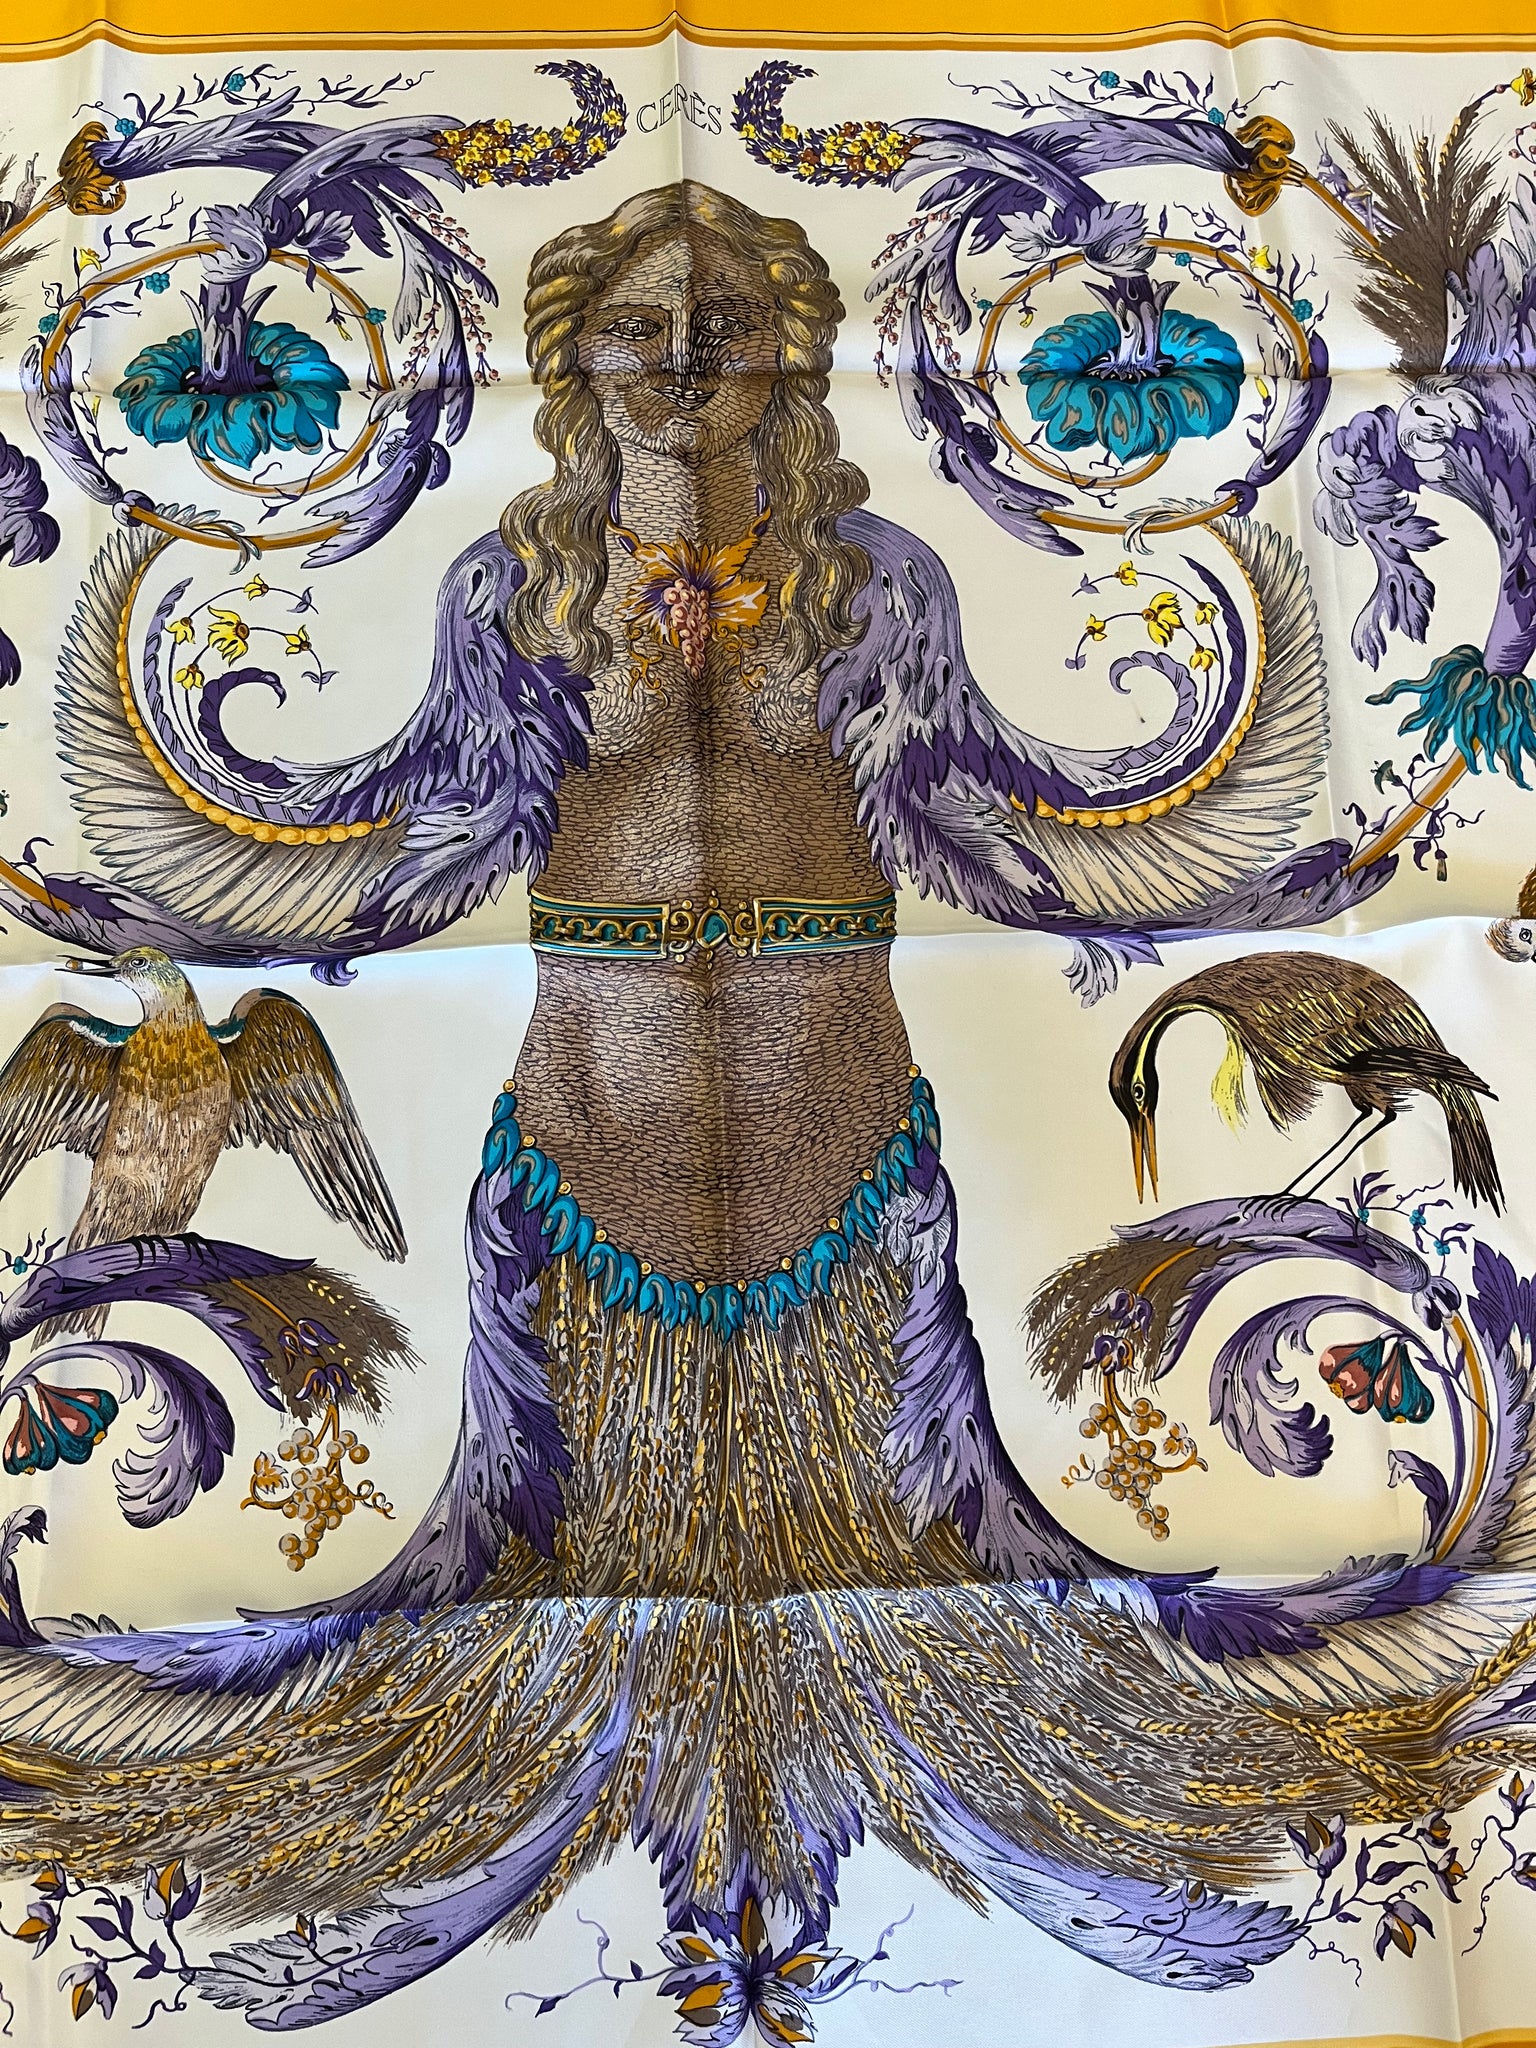 Hermes "Ceres" 1967 Silk Scarf by Francoise Faconnet 35" x 35"